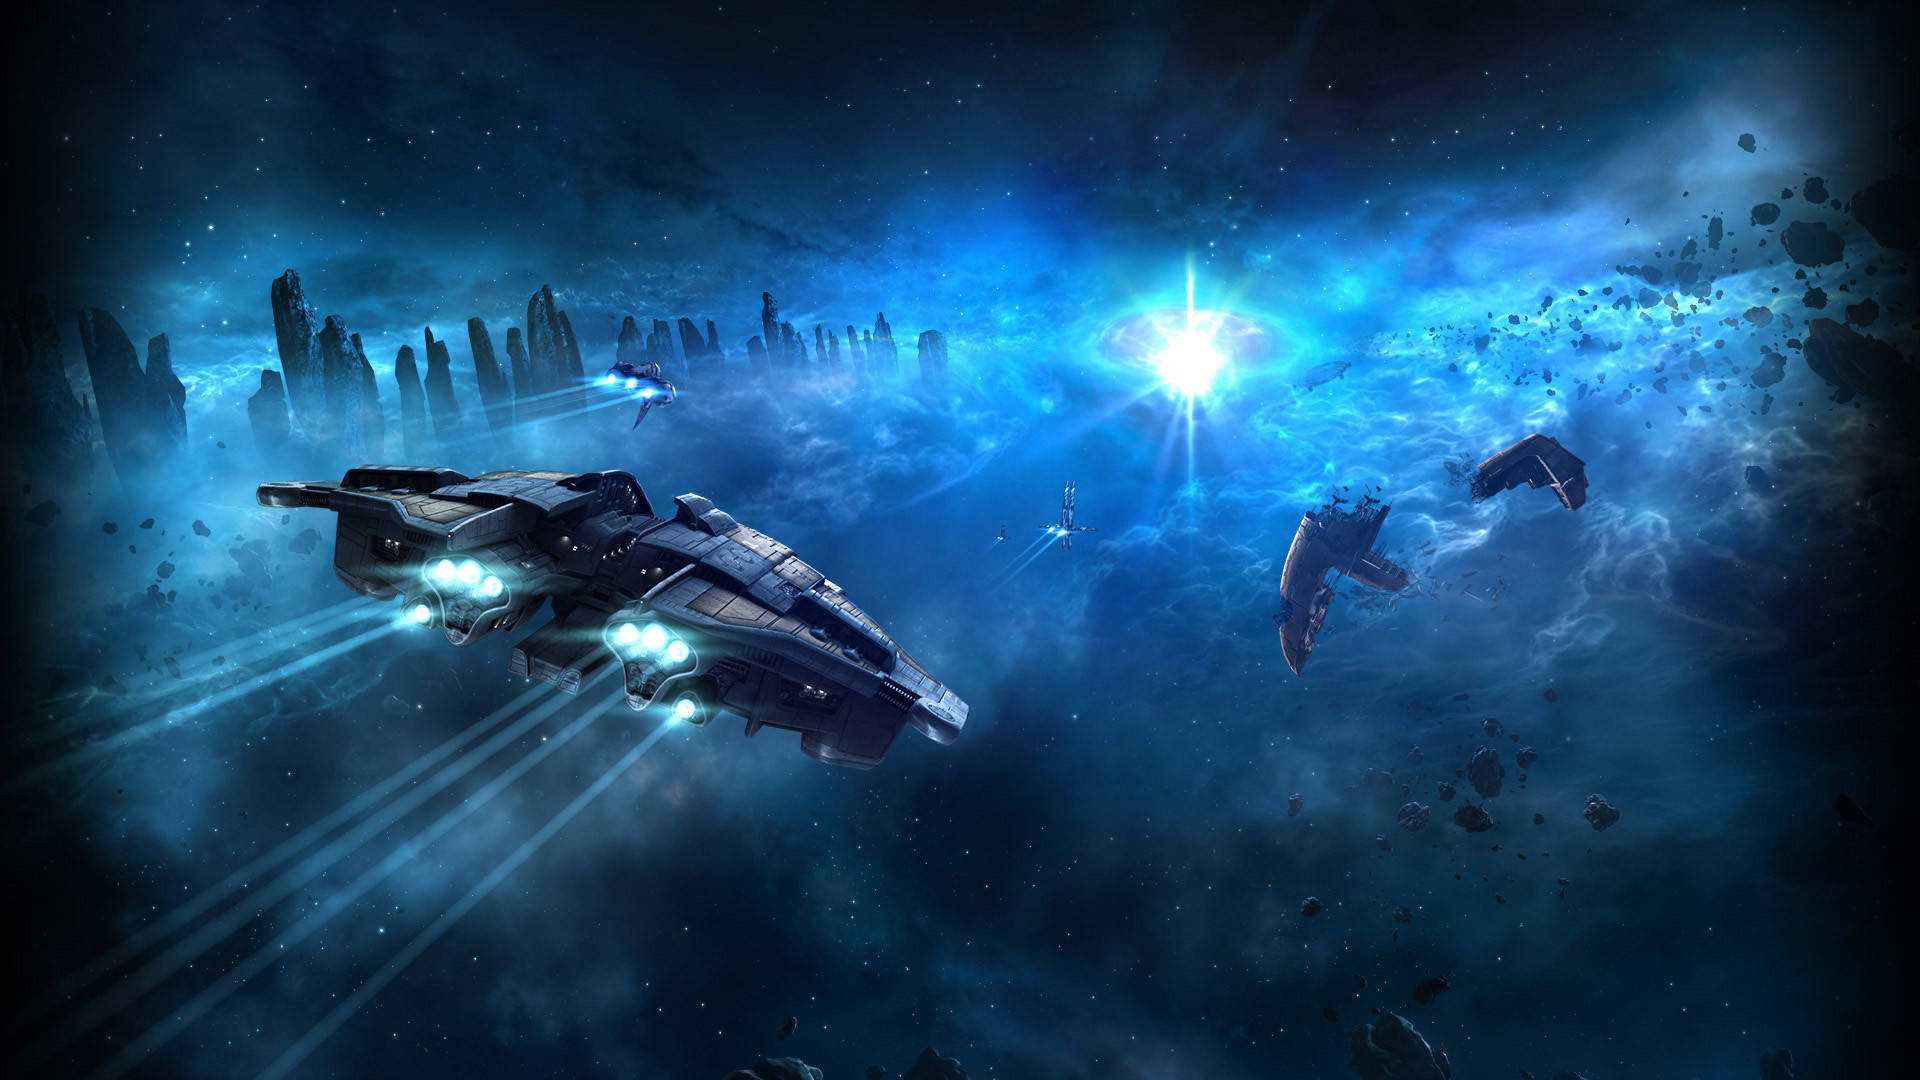 Top 999+ Eve Online Wallpaper Full HD, 4K Free to Use